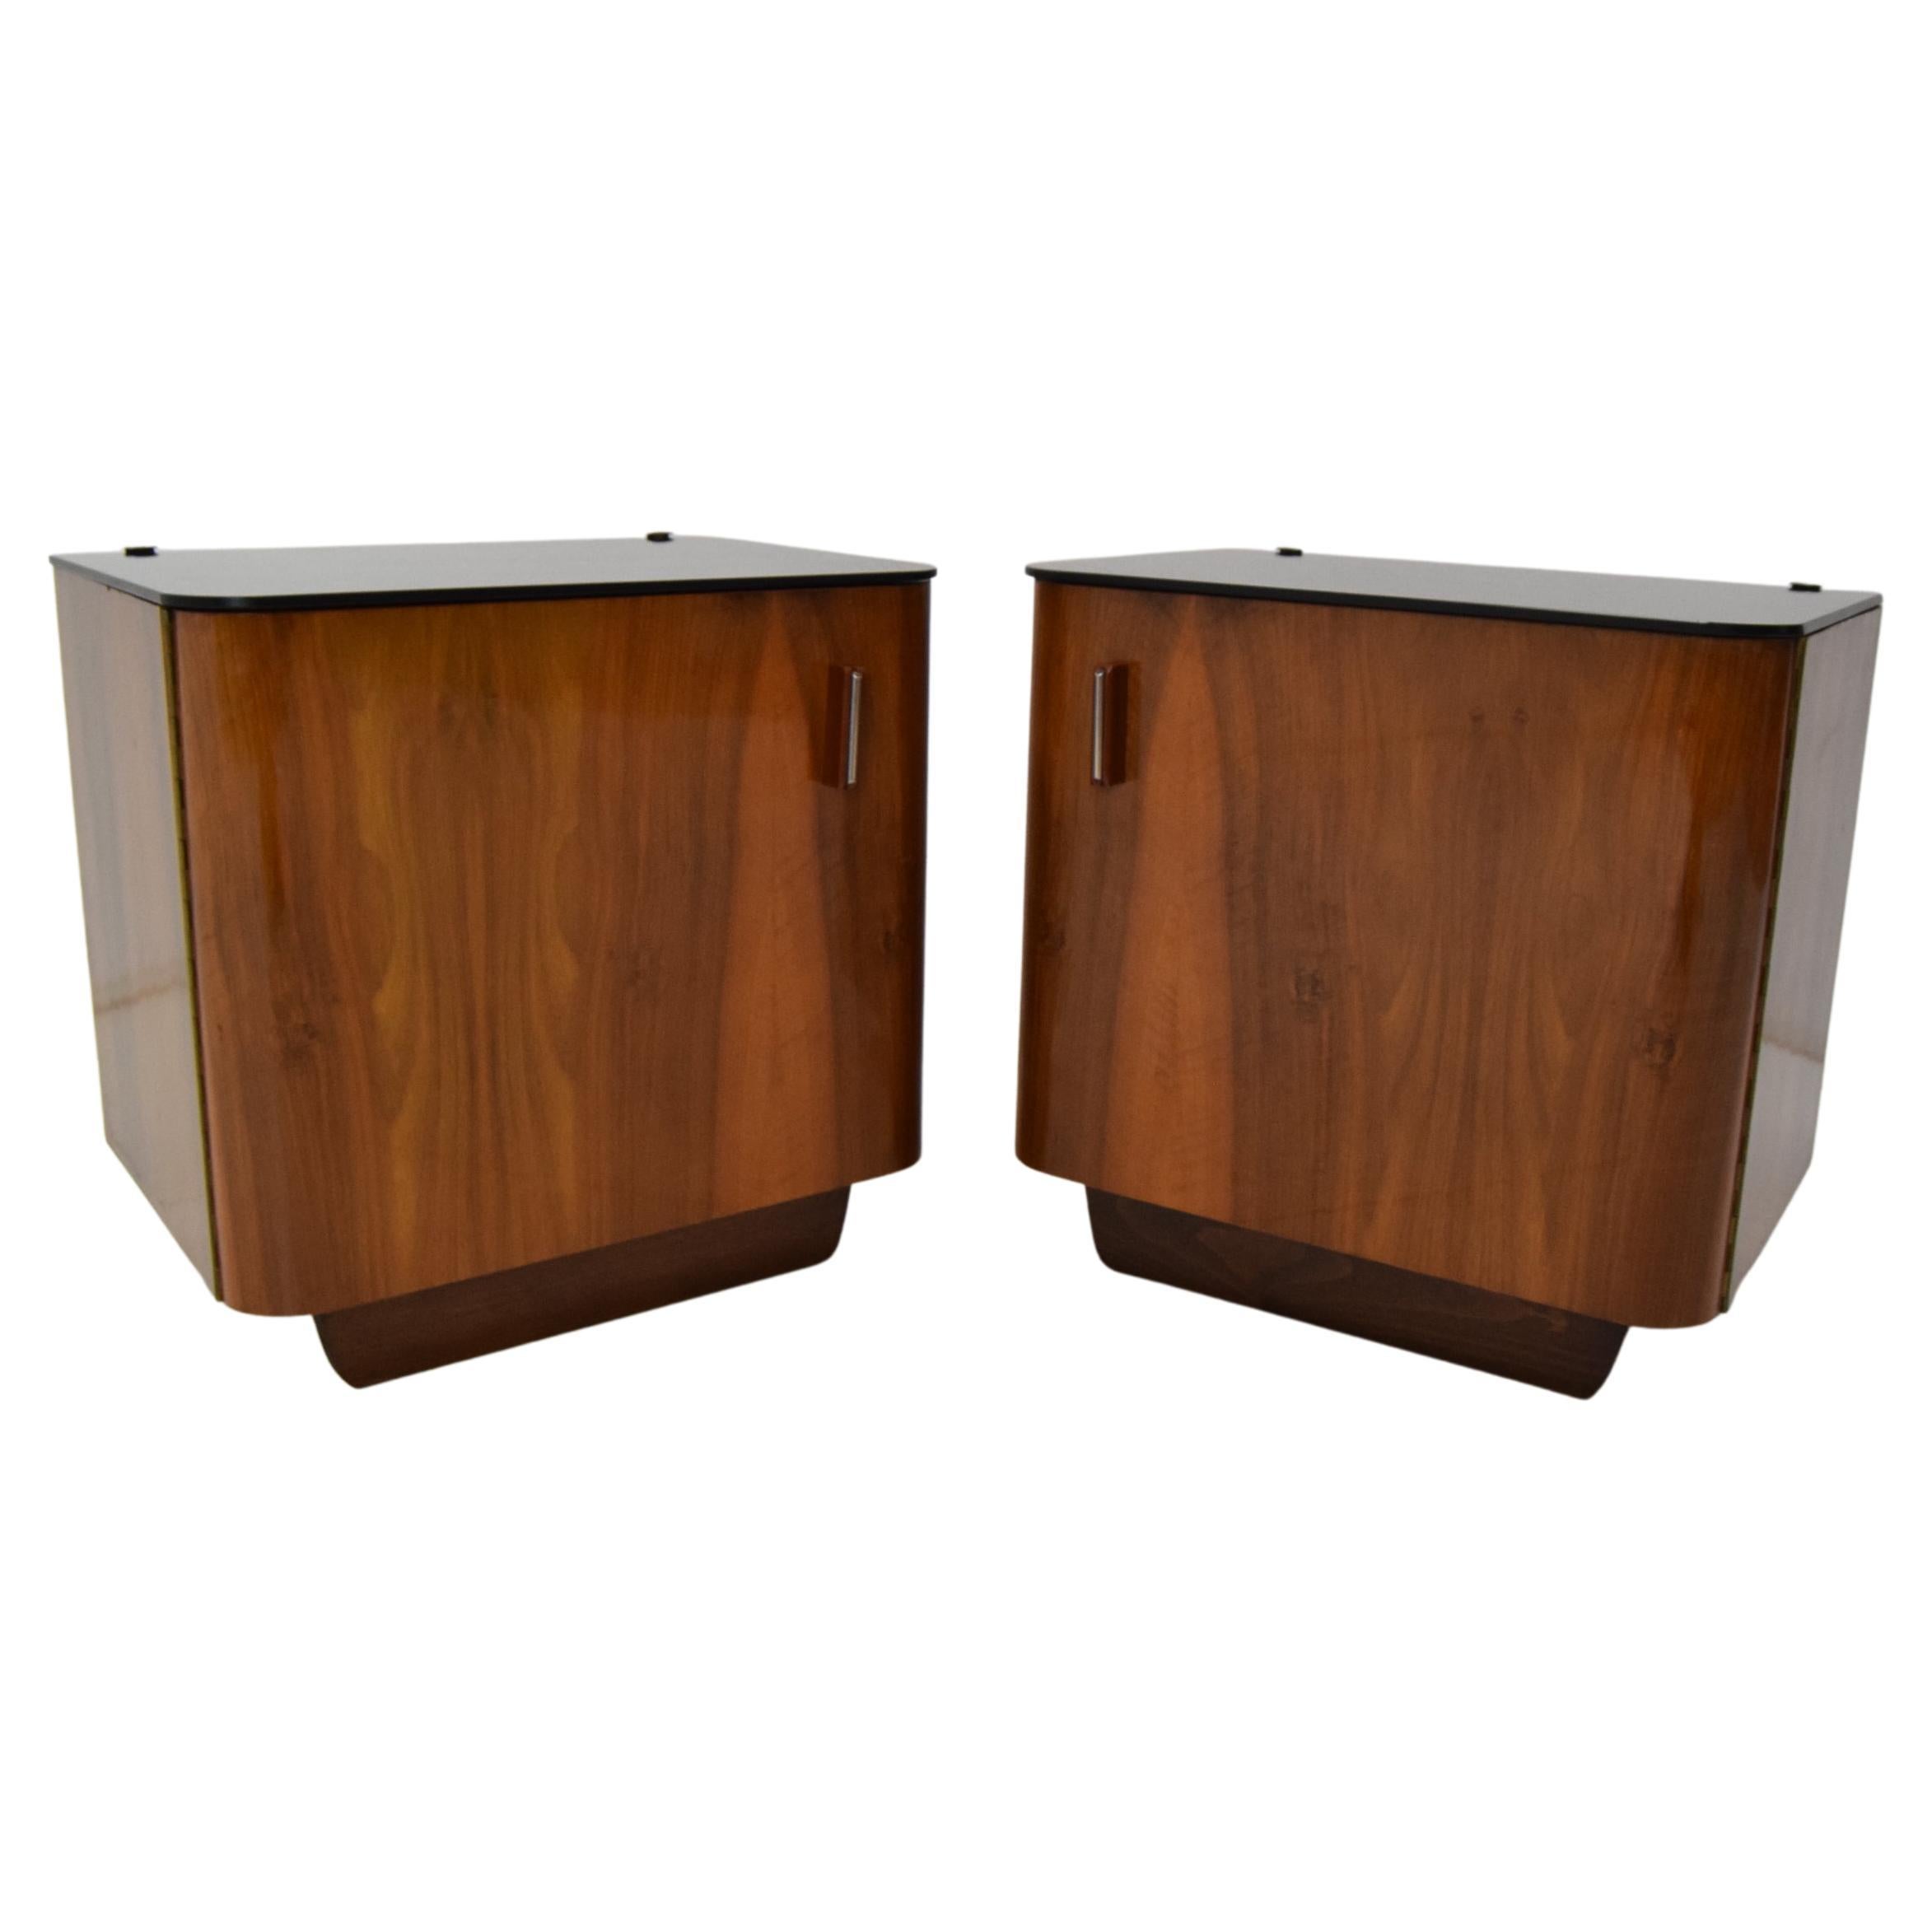 Pair of Mid-Century Night Tables, Designed by Jindrich Halabala, 1950's